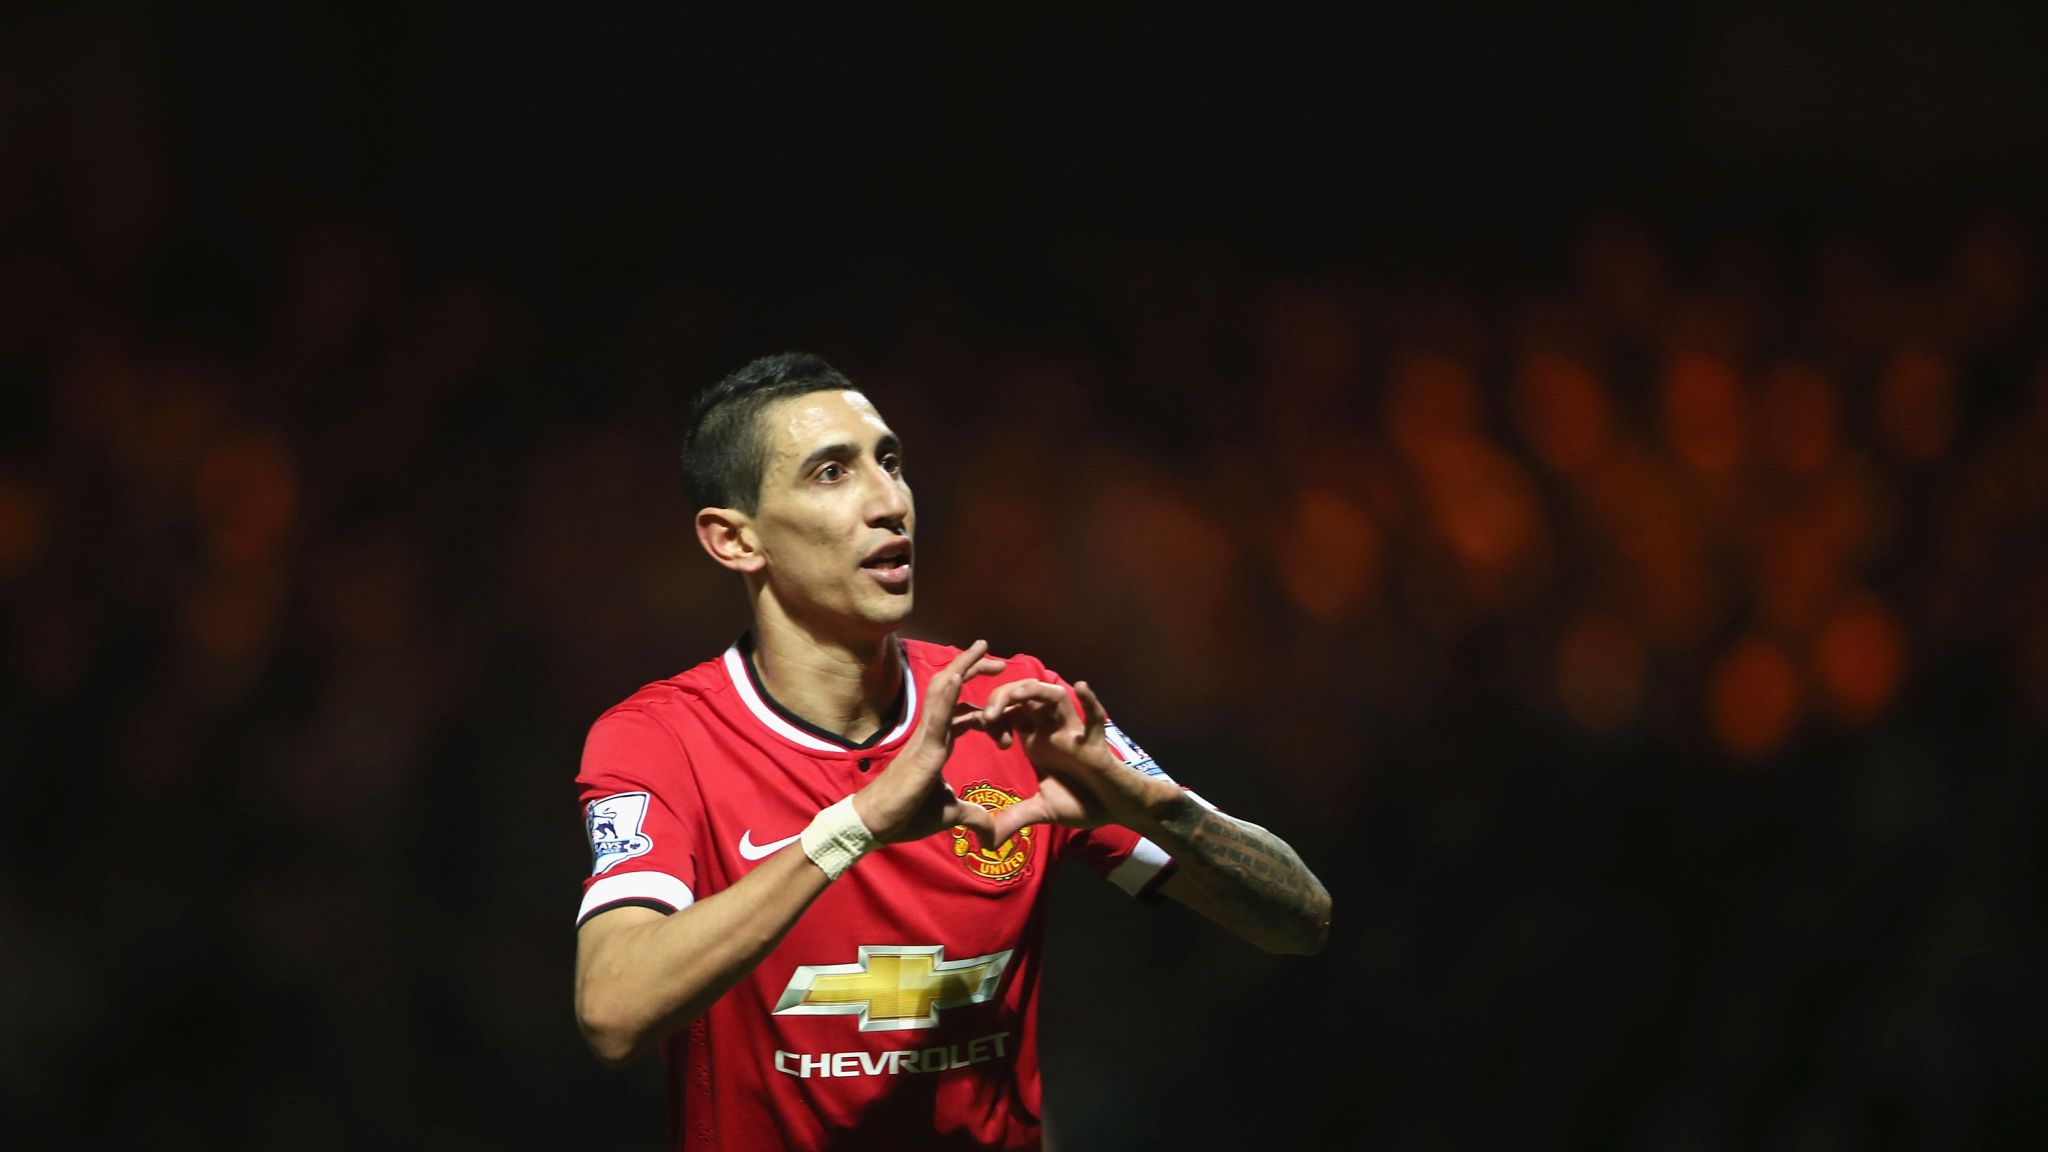 Angel Di Maria to PSG: Manchester United 'offered Gregory van der Wiel' in  potential swap deal with Ligue 1 club, The Independent